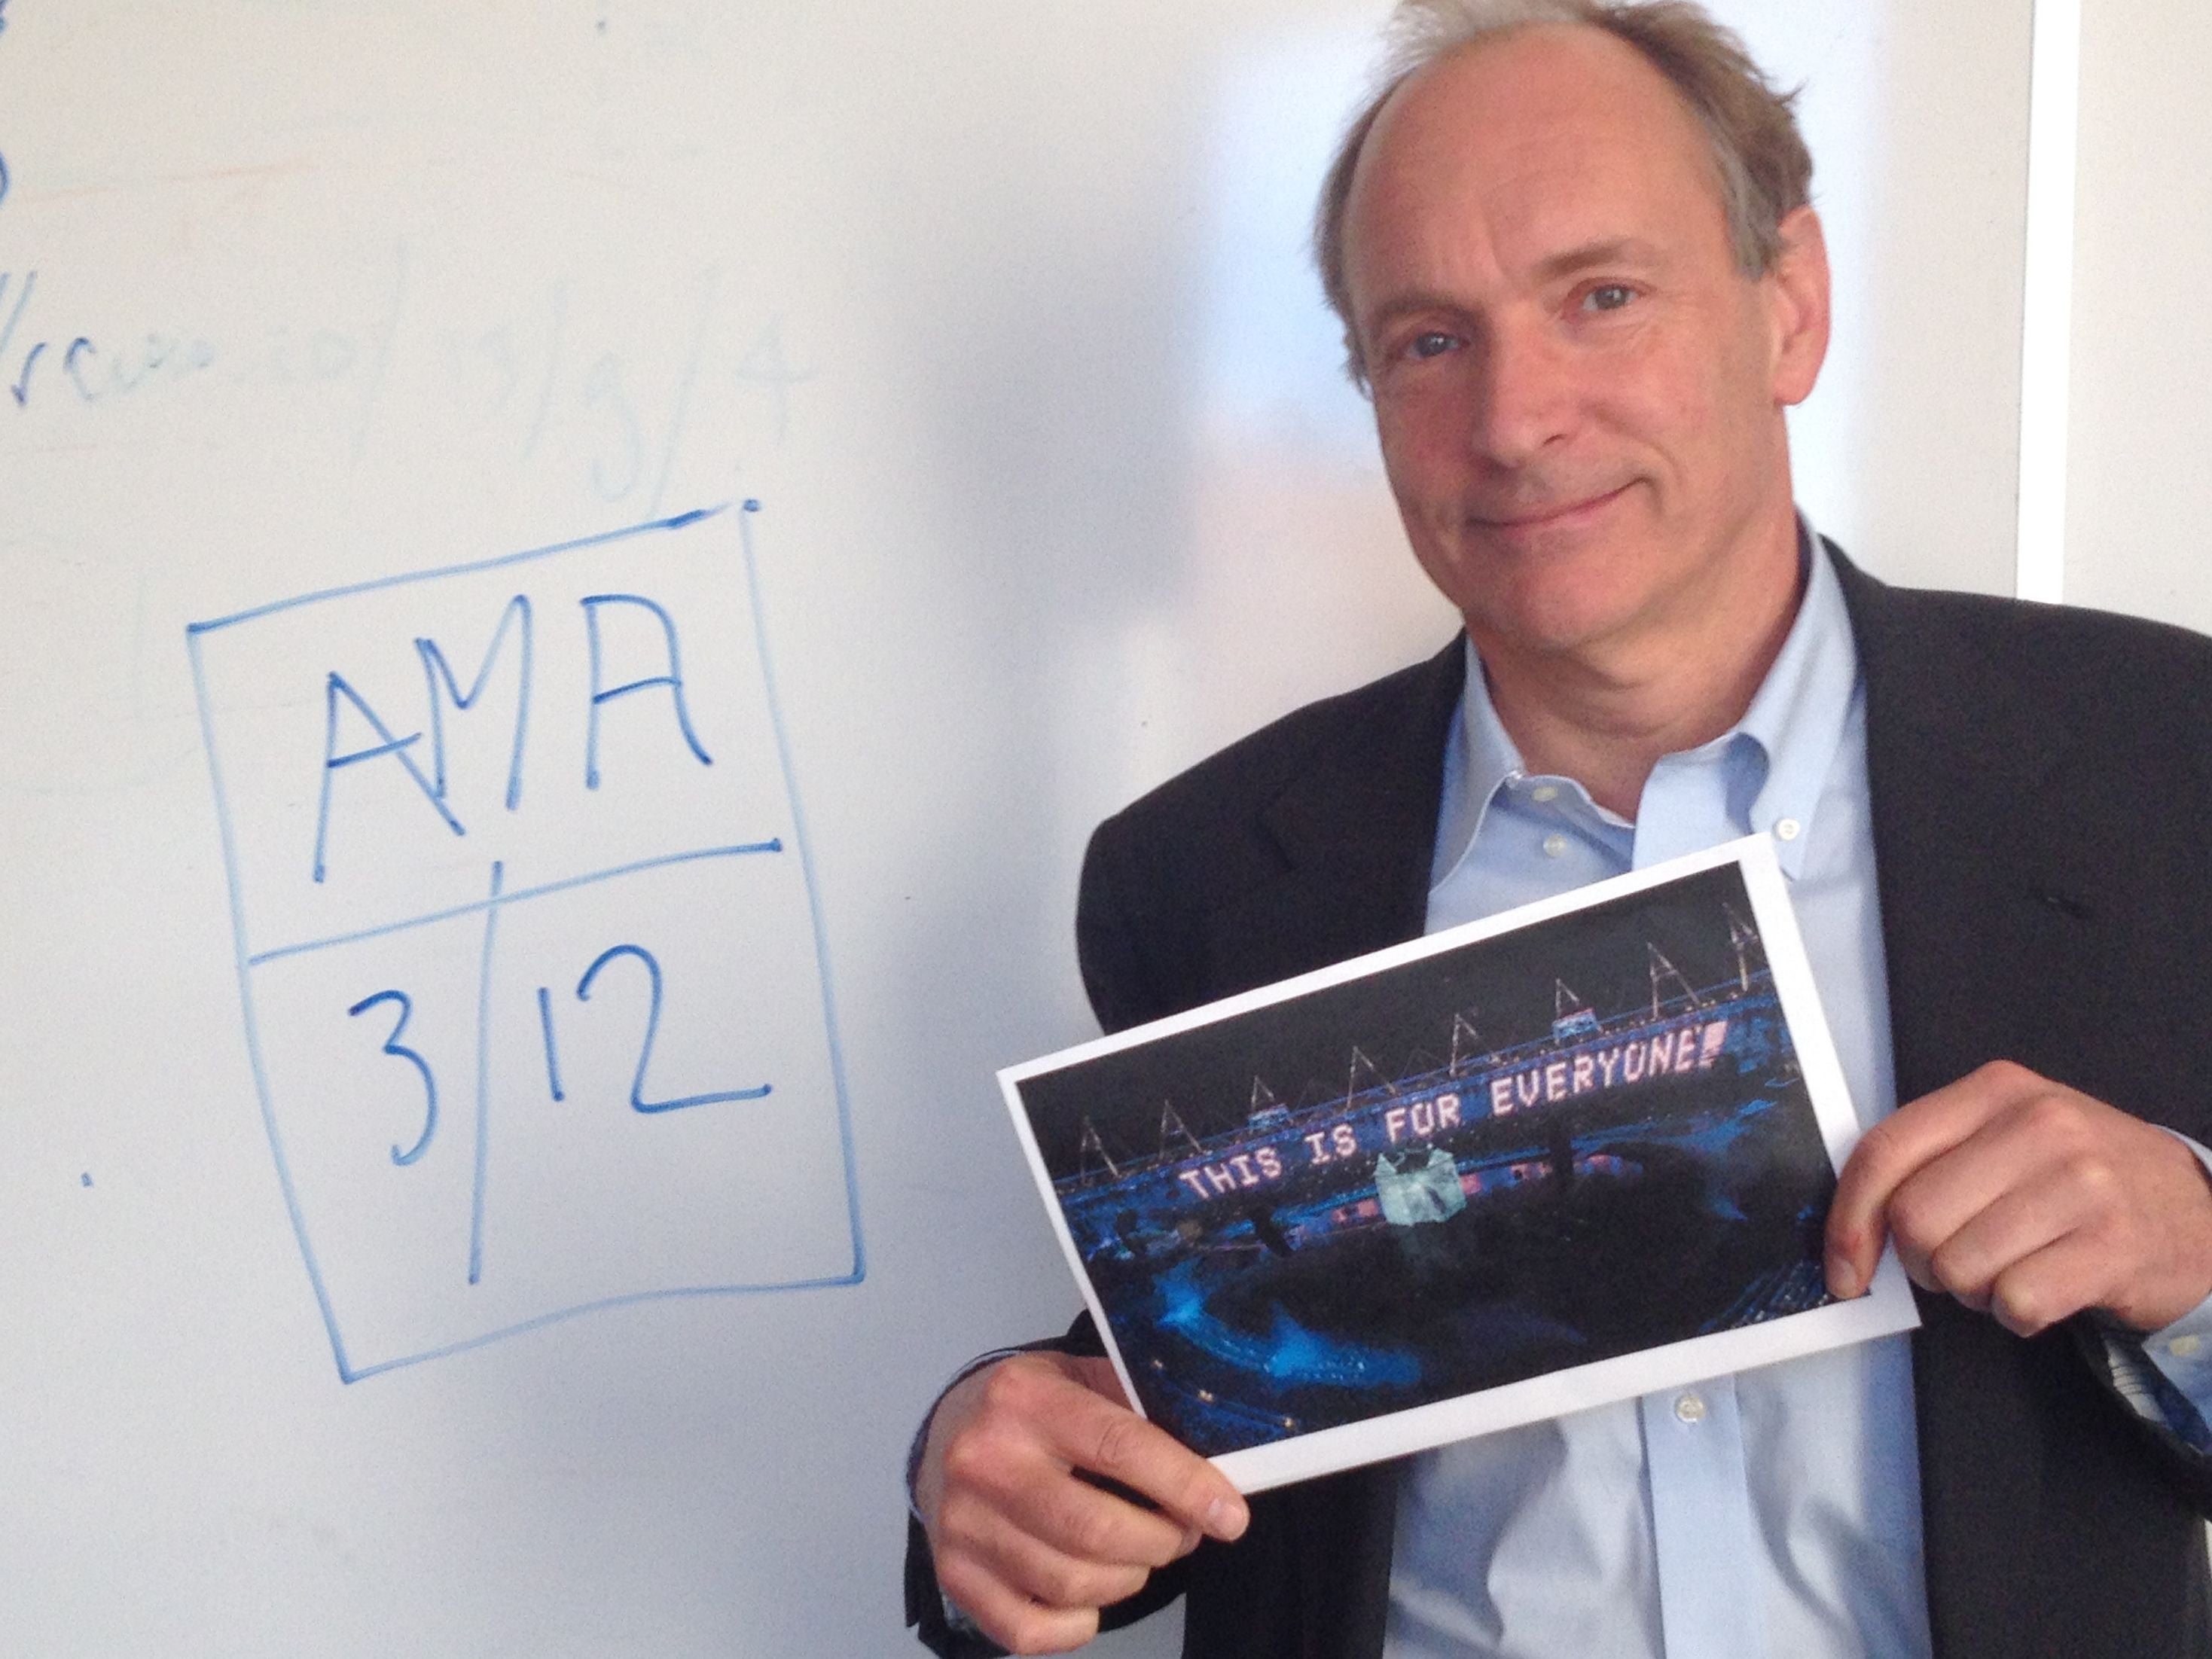 Tim Berners-Lee holds up proof that it's him for his Reddit AMA